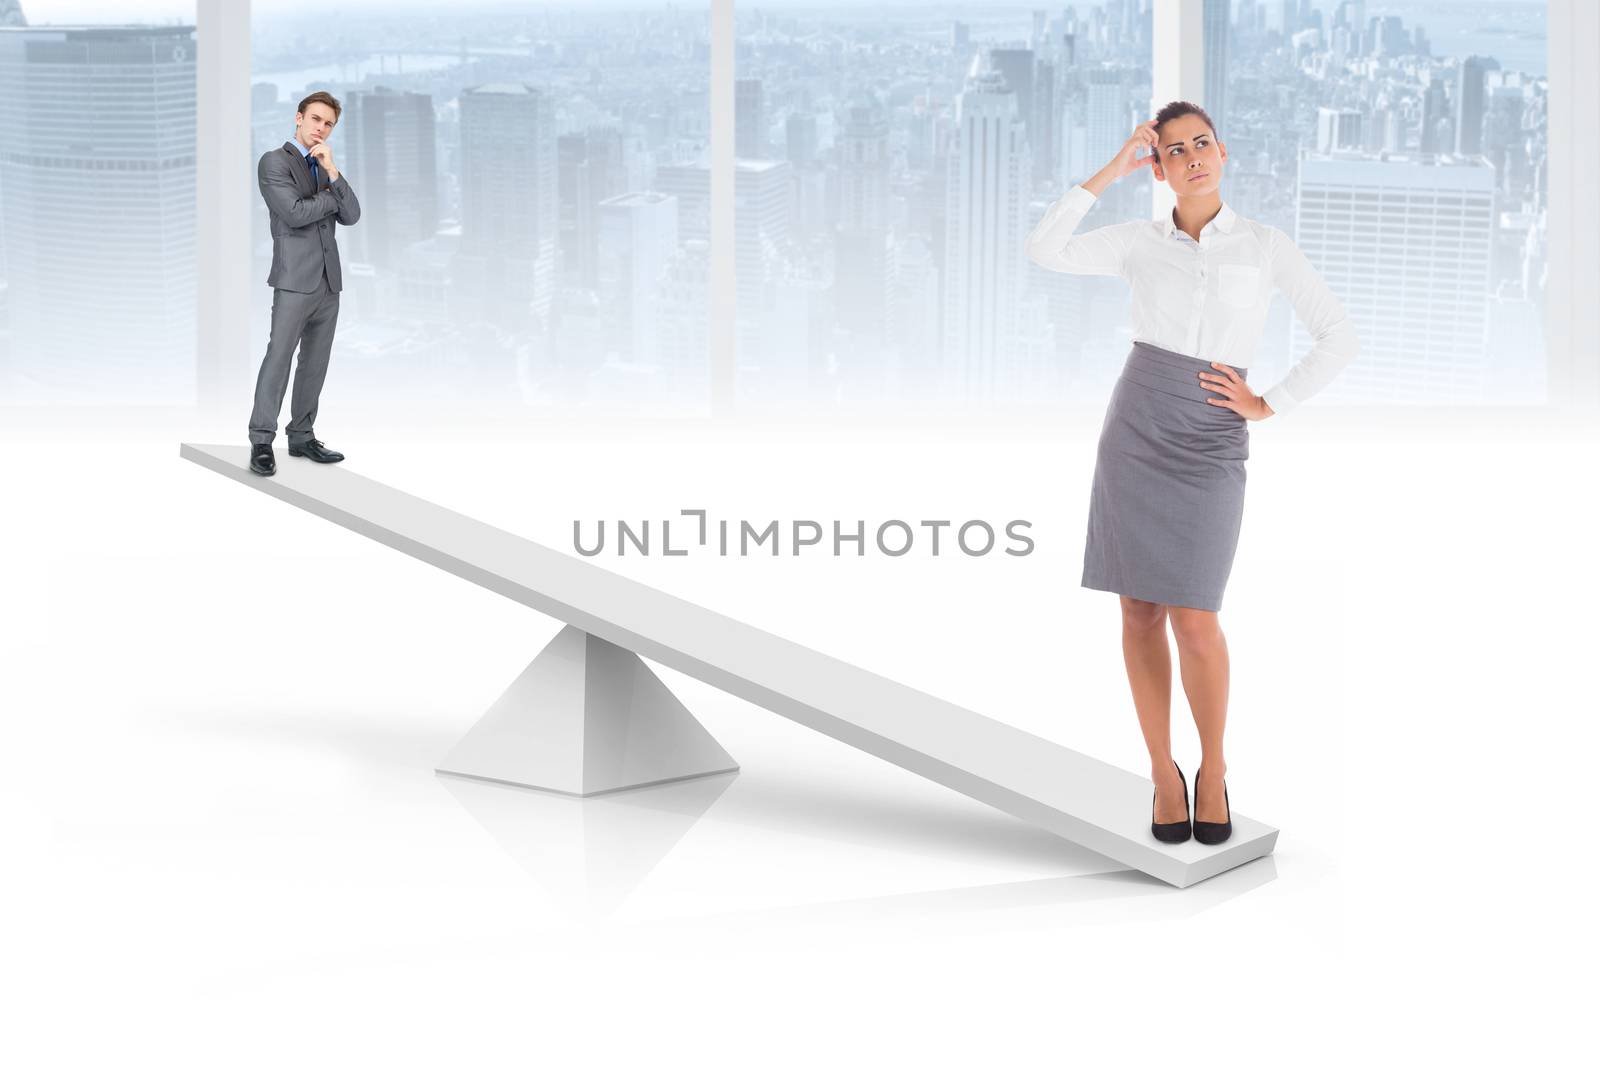 White scales weighing businessman and businesswoman in white room overlooking city